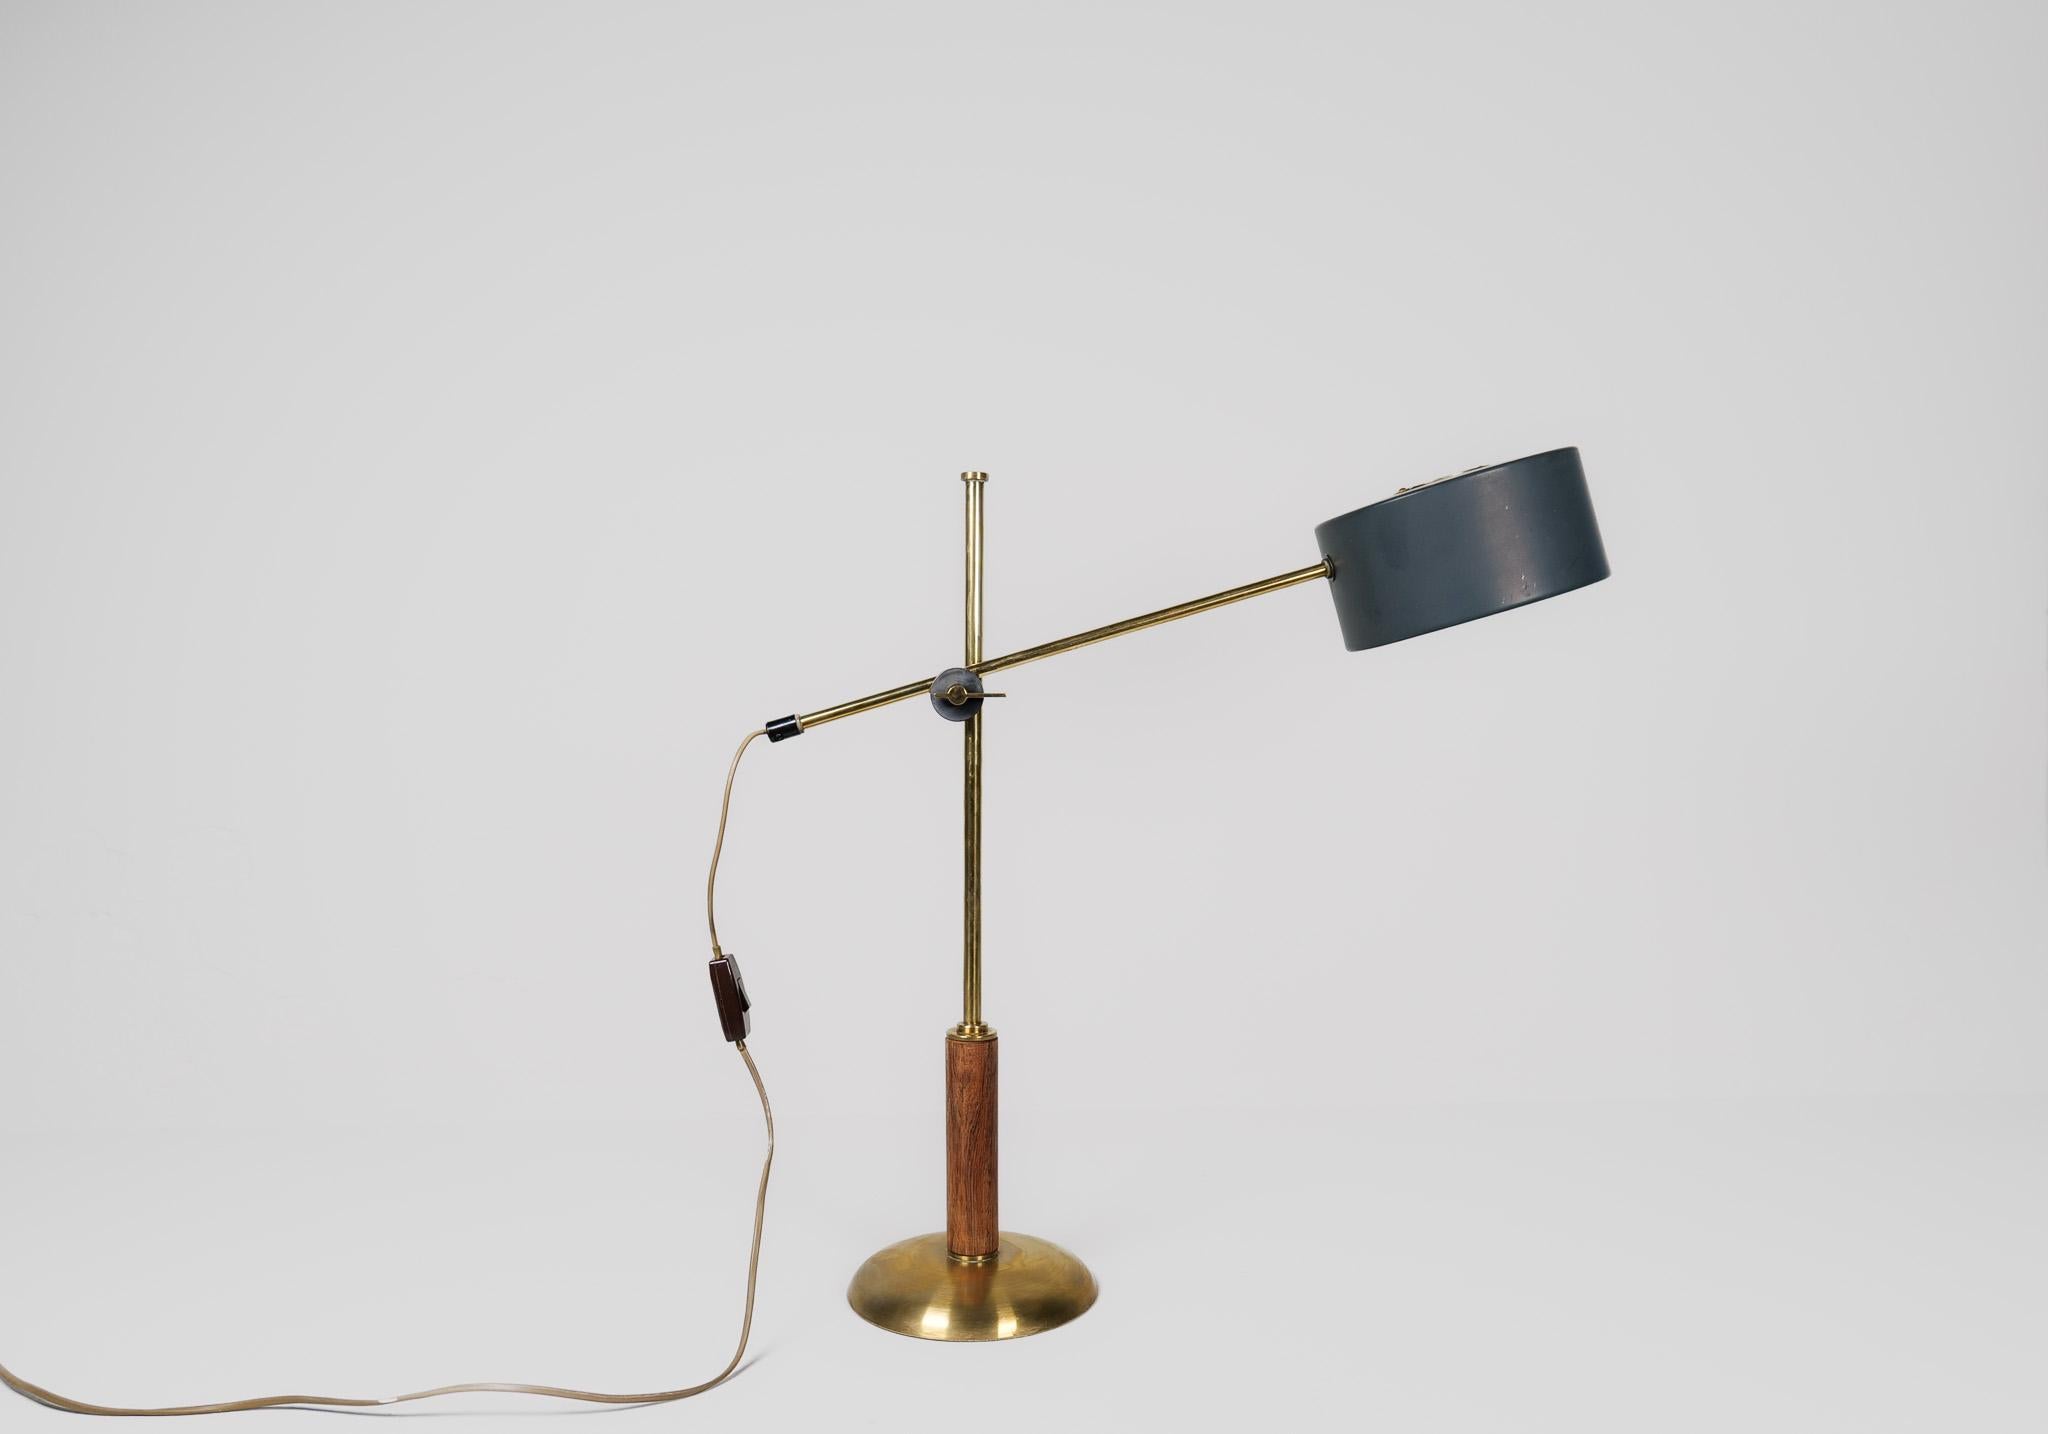 This rare table lamp produced in Sweden and designed by Einar Bäckström is adjustable in both height and angles. 
Brass base with walnut rod and a lacquered shade with brass details. 

Good vintage condition with some wear to the shade.